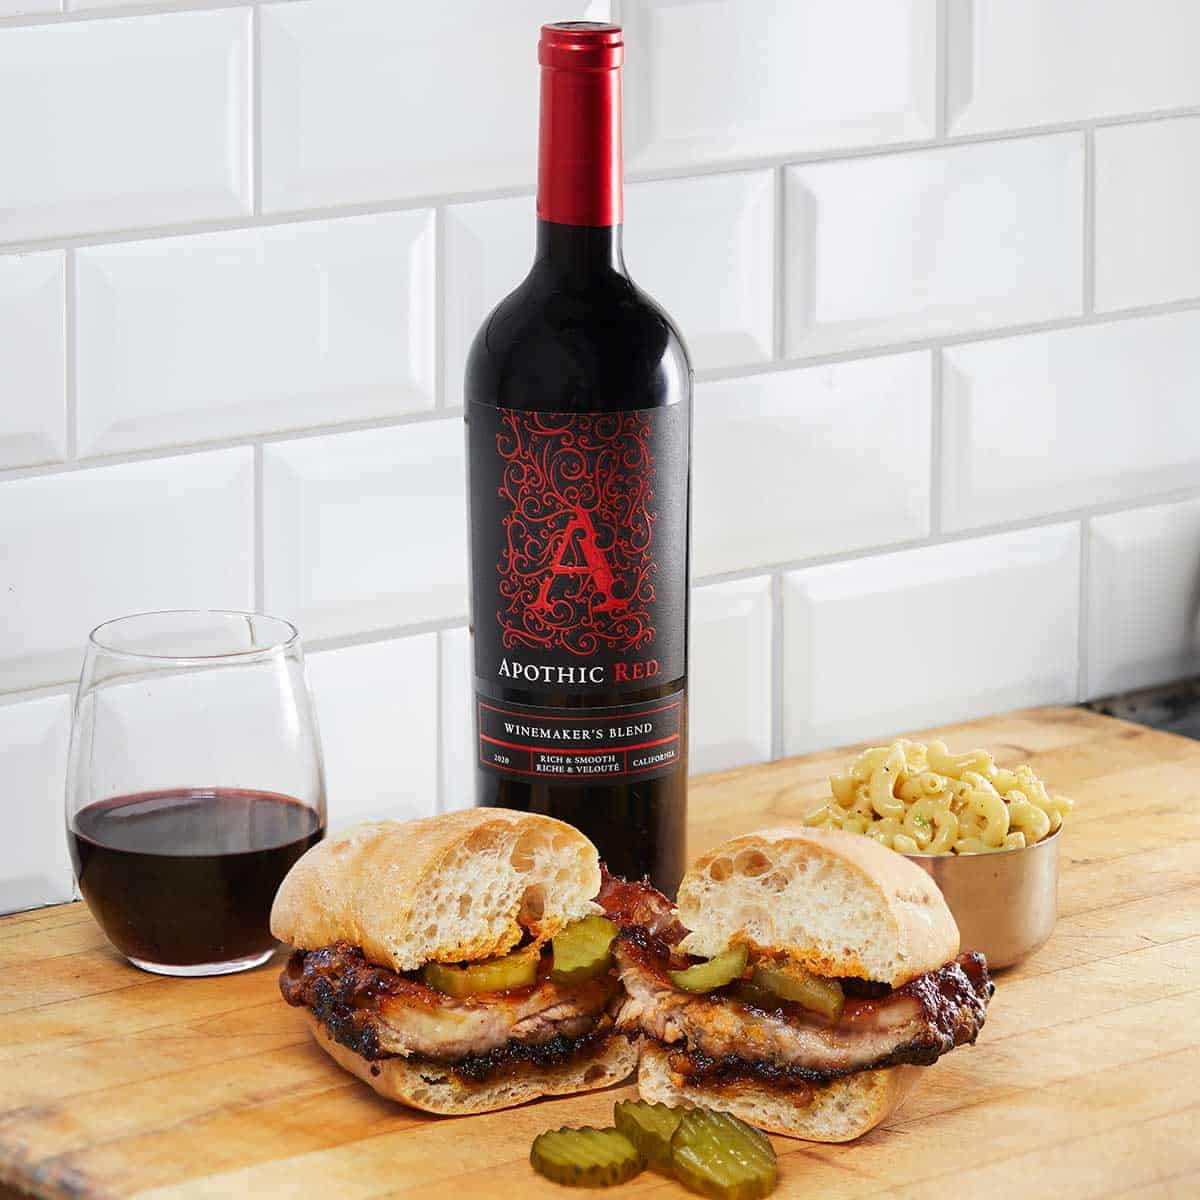 A rib sandwich and pasta salad bowl in front of a glass and a bottle of Apothic Red